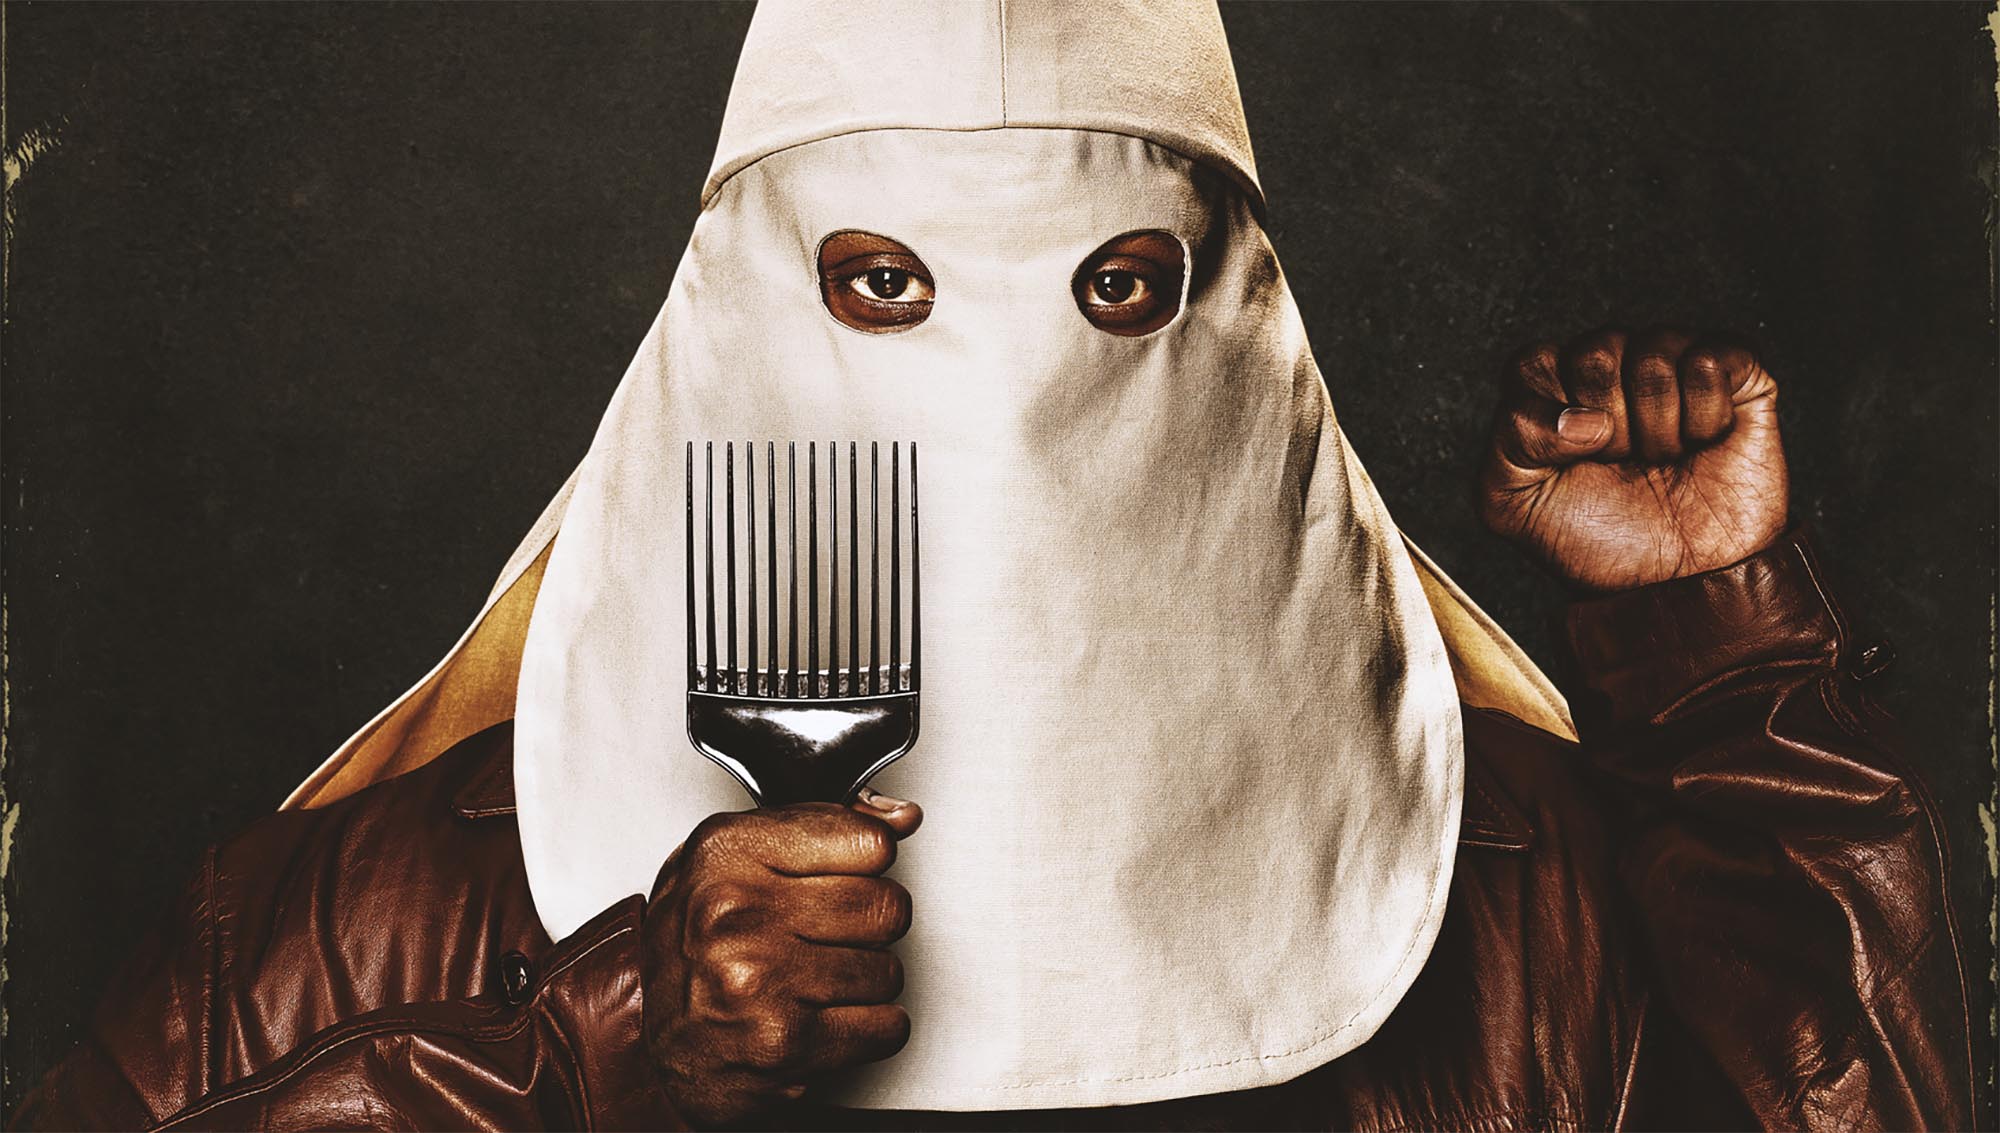 Produced by the team behind 'Get Out' and directed by visionary filmmaker Spike Lee, 'BlacKkKlansman' tells the incredible true story of an American hero.